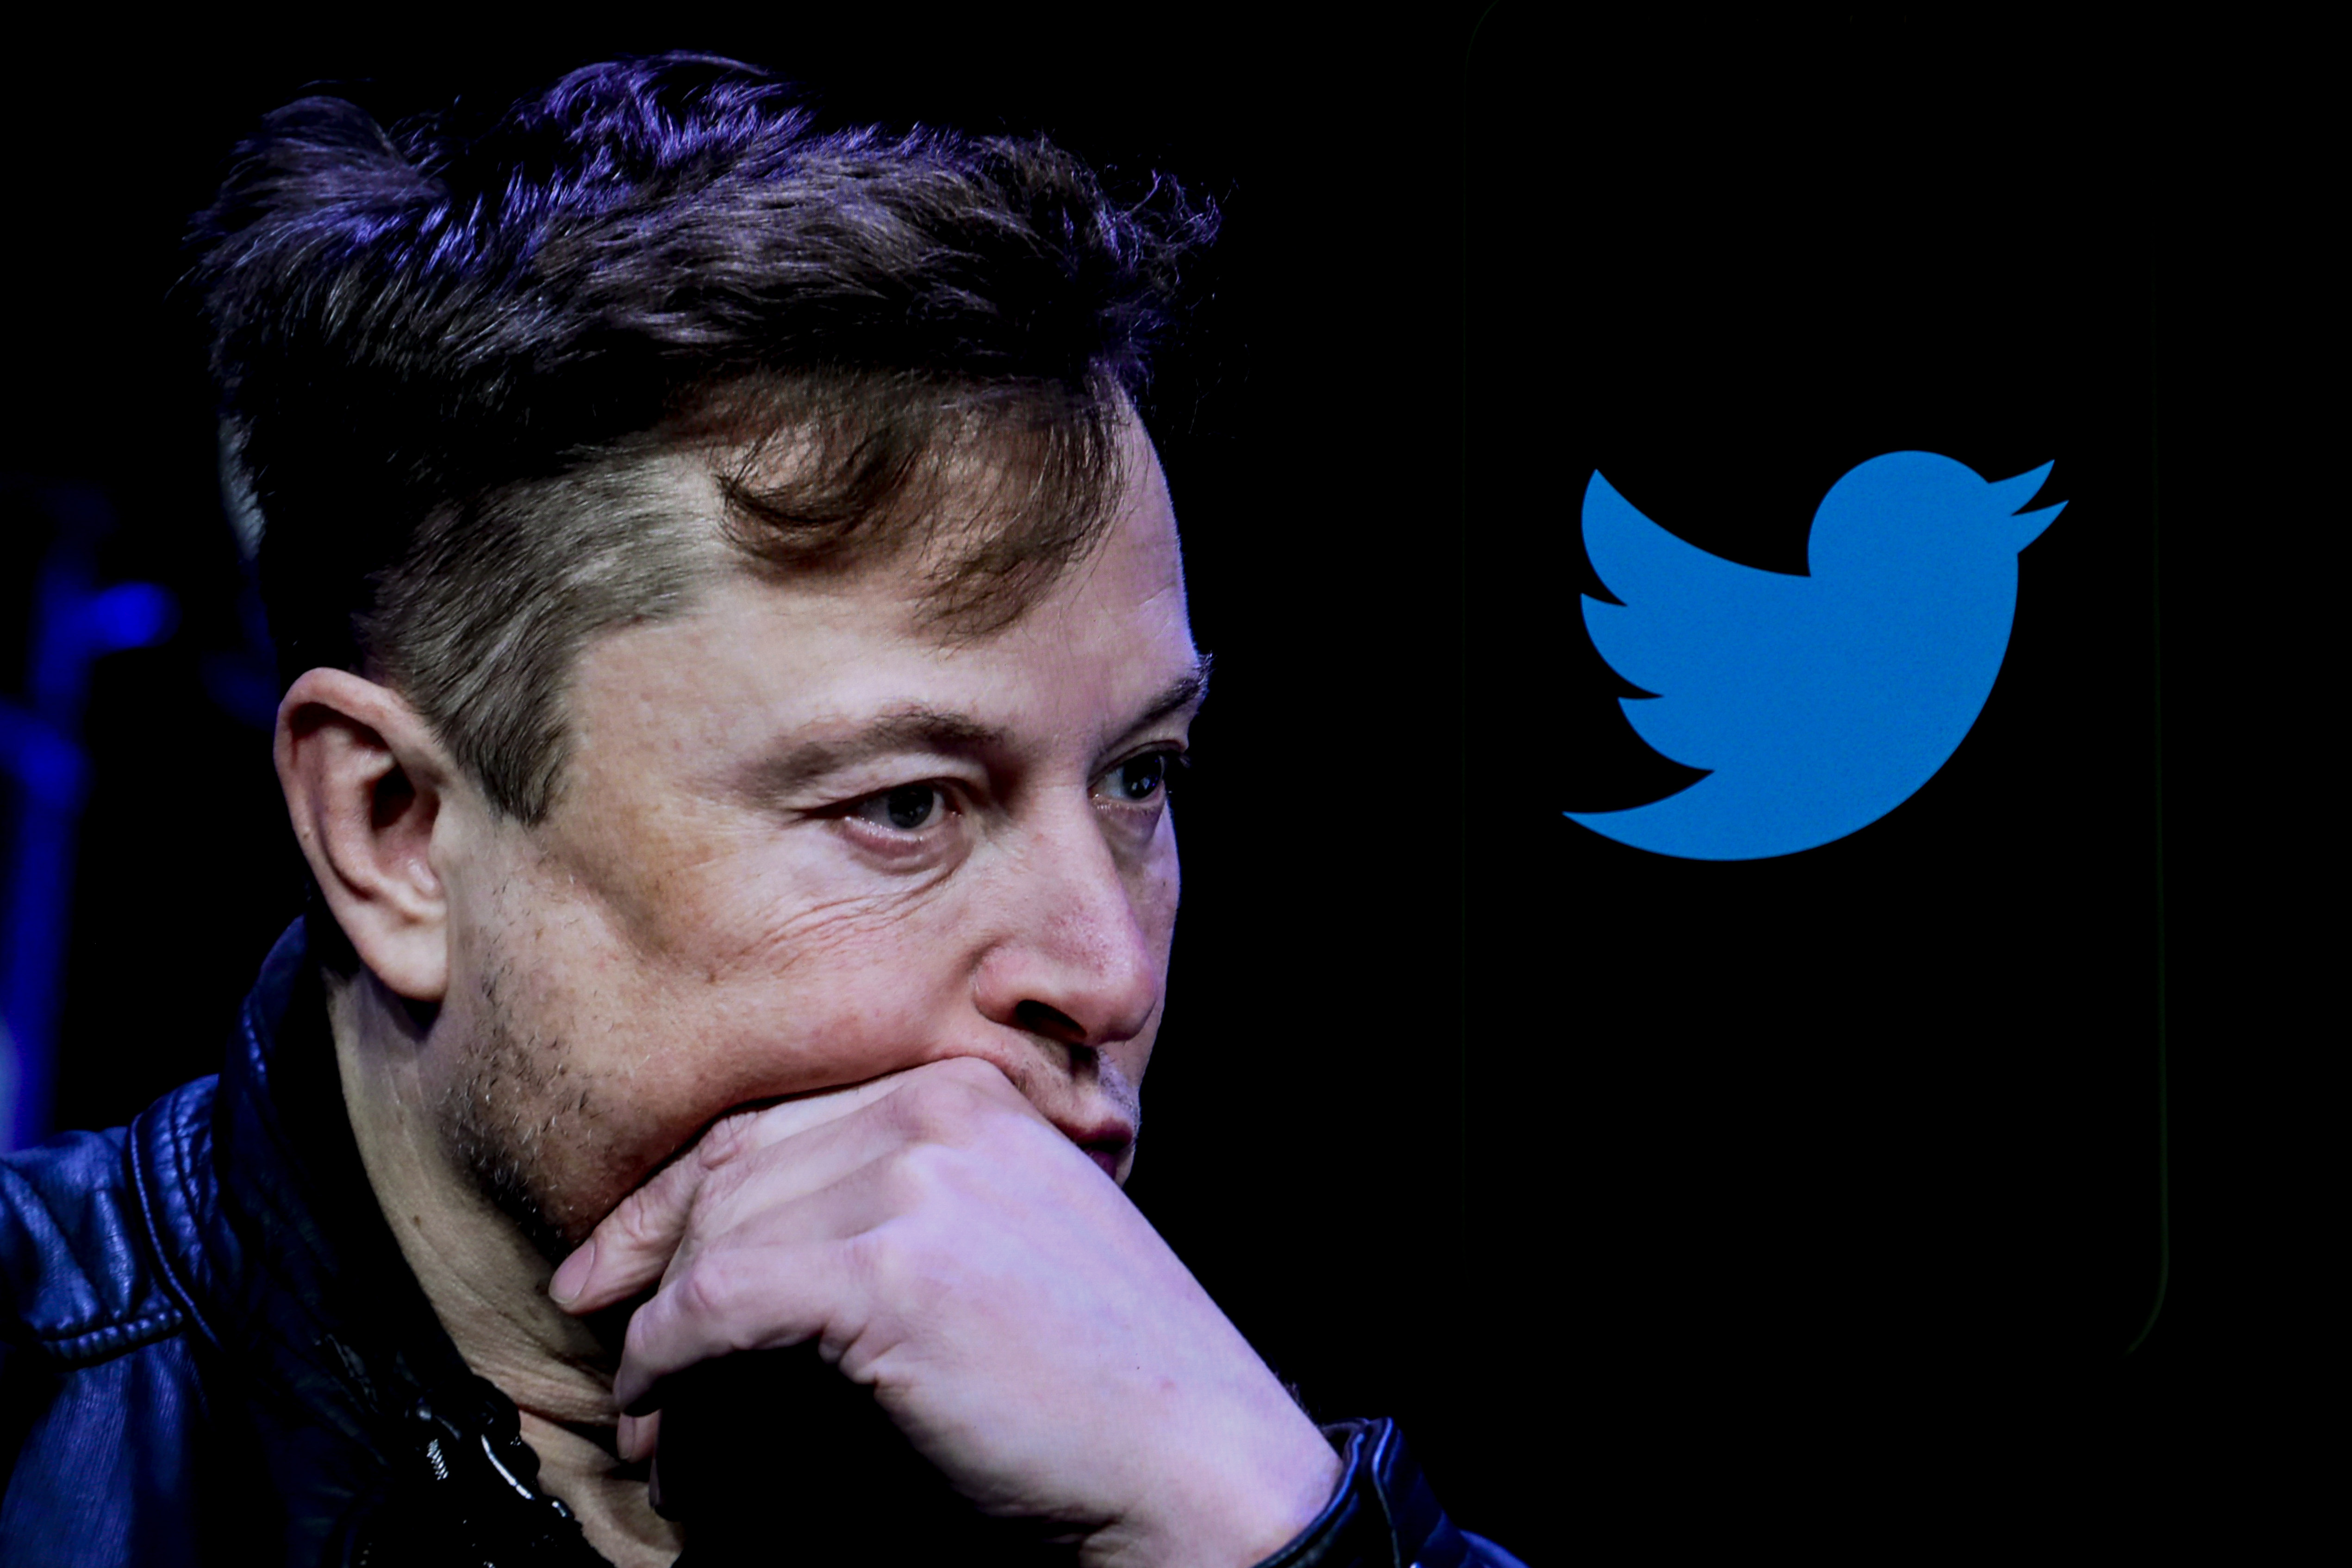 Elon Musk Announces He Doesn’t Have “Any Suicidal Thoughts” On Twitter